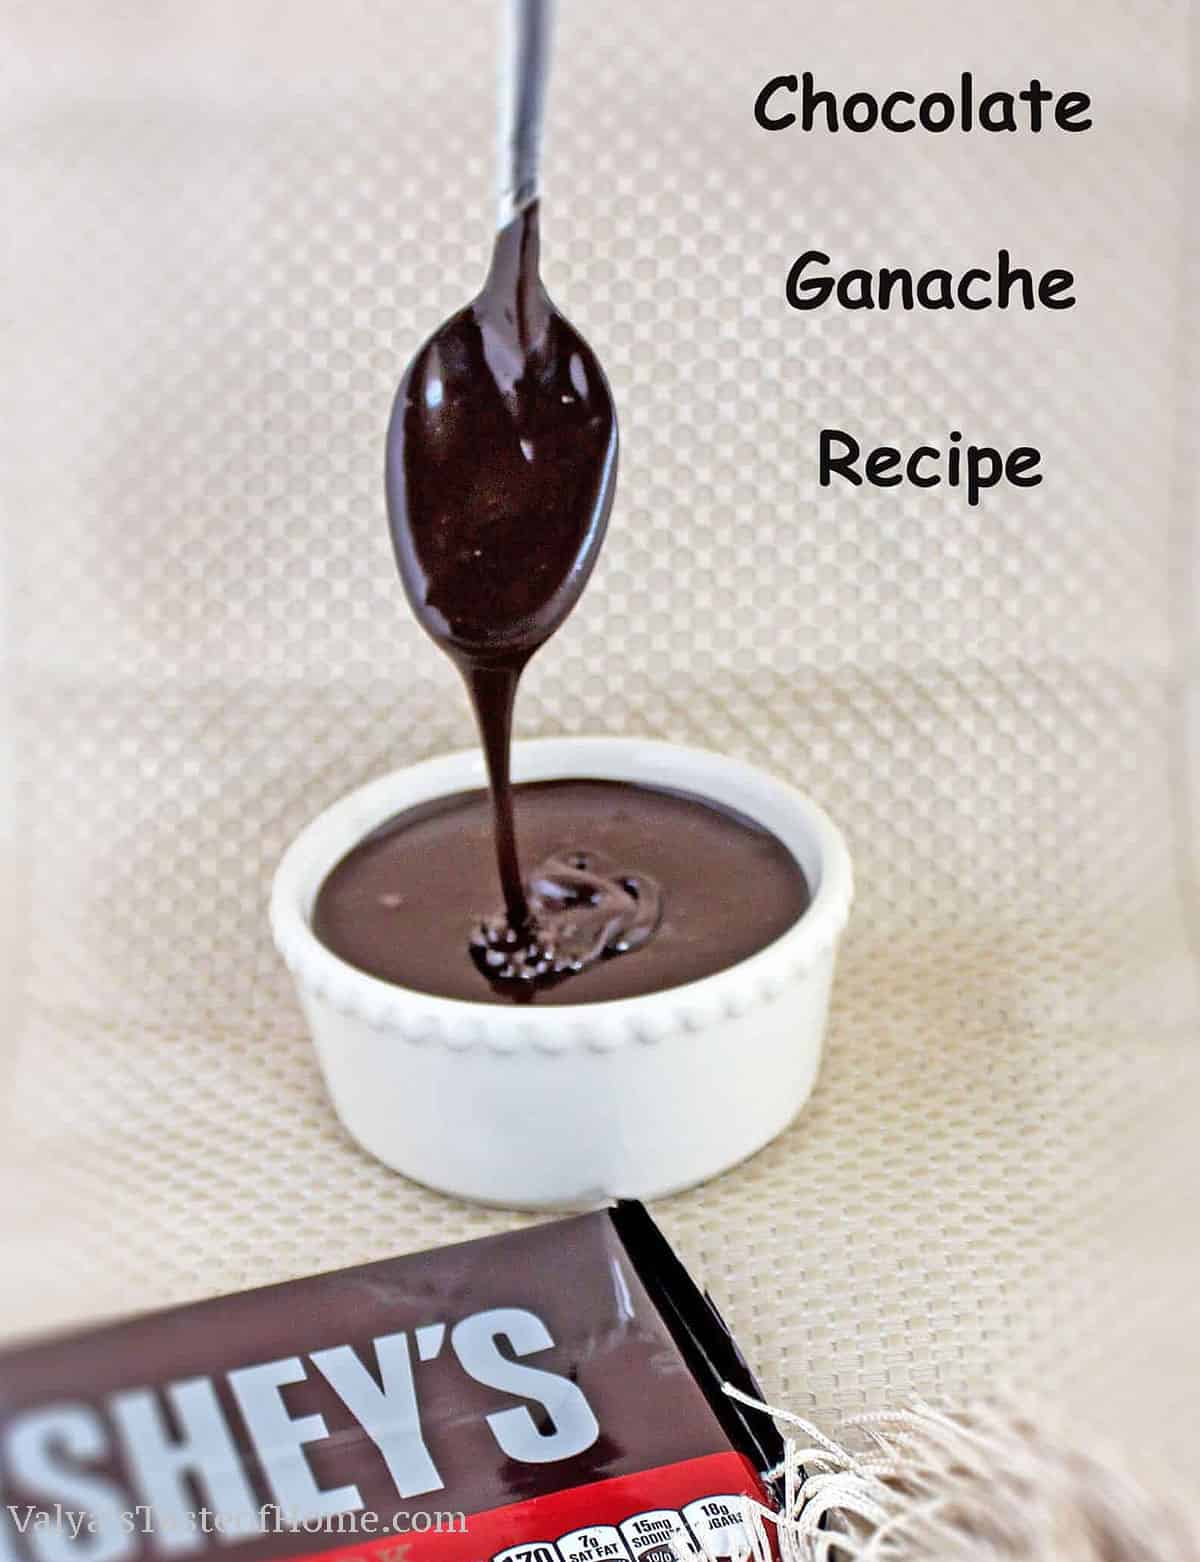 The ratio of cream to chocolate can vary depending on how thick or thin you want the ganache to be, but my recipe shares the best ratio that will give you foolproof results every single time.